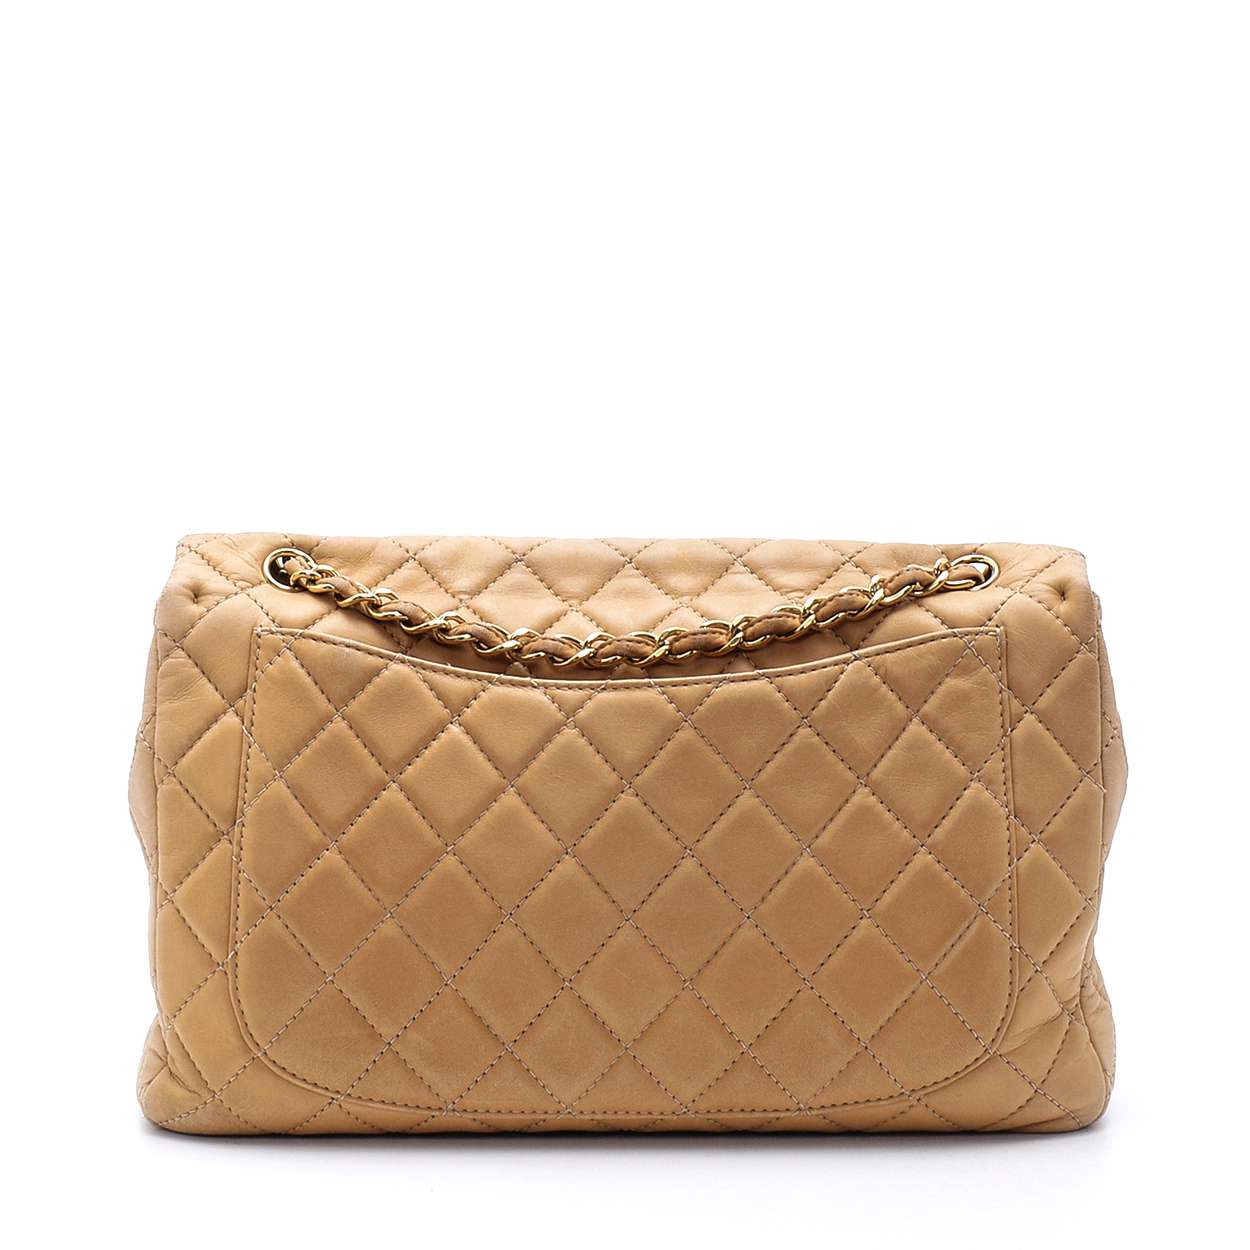 Chanel - Beige Quilted Lambskin Leather Jumbo Single Flap Bag